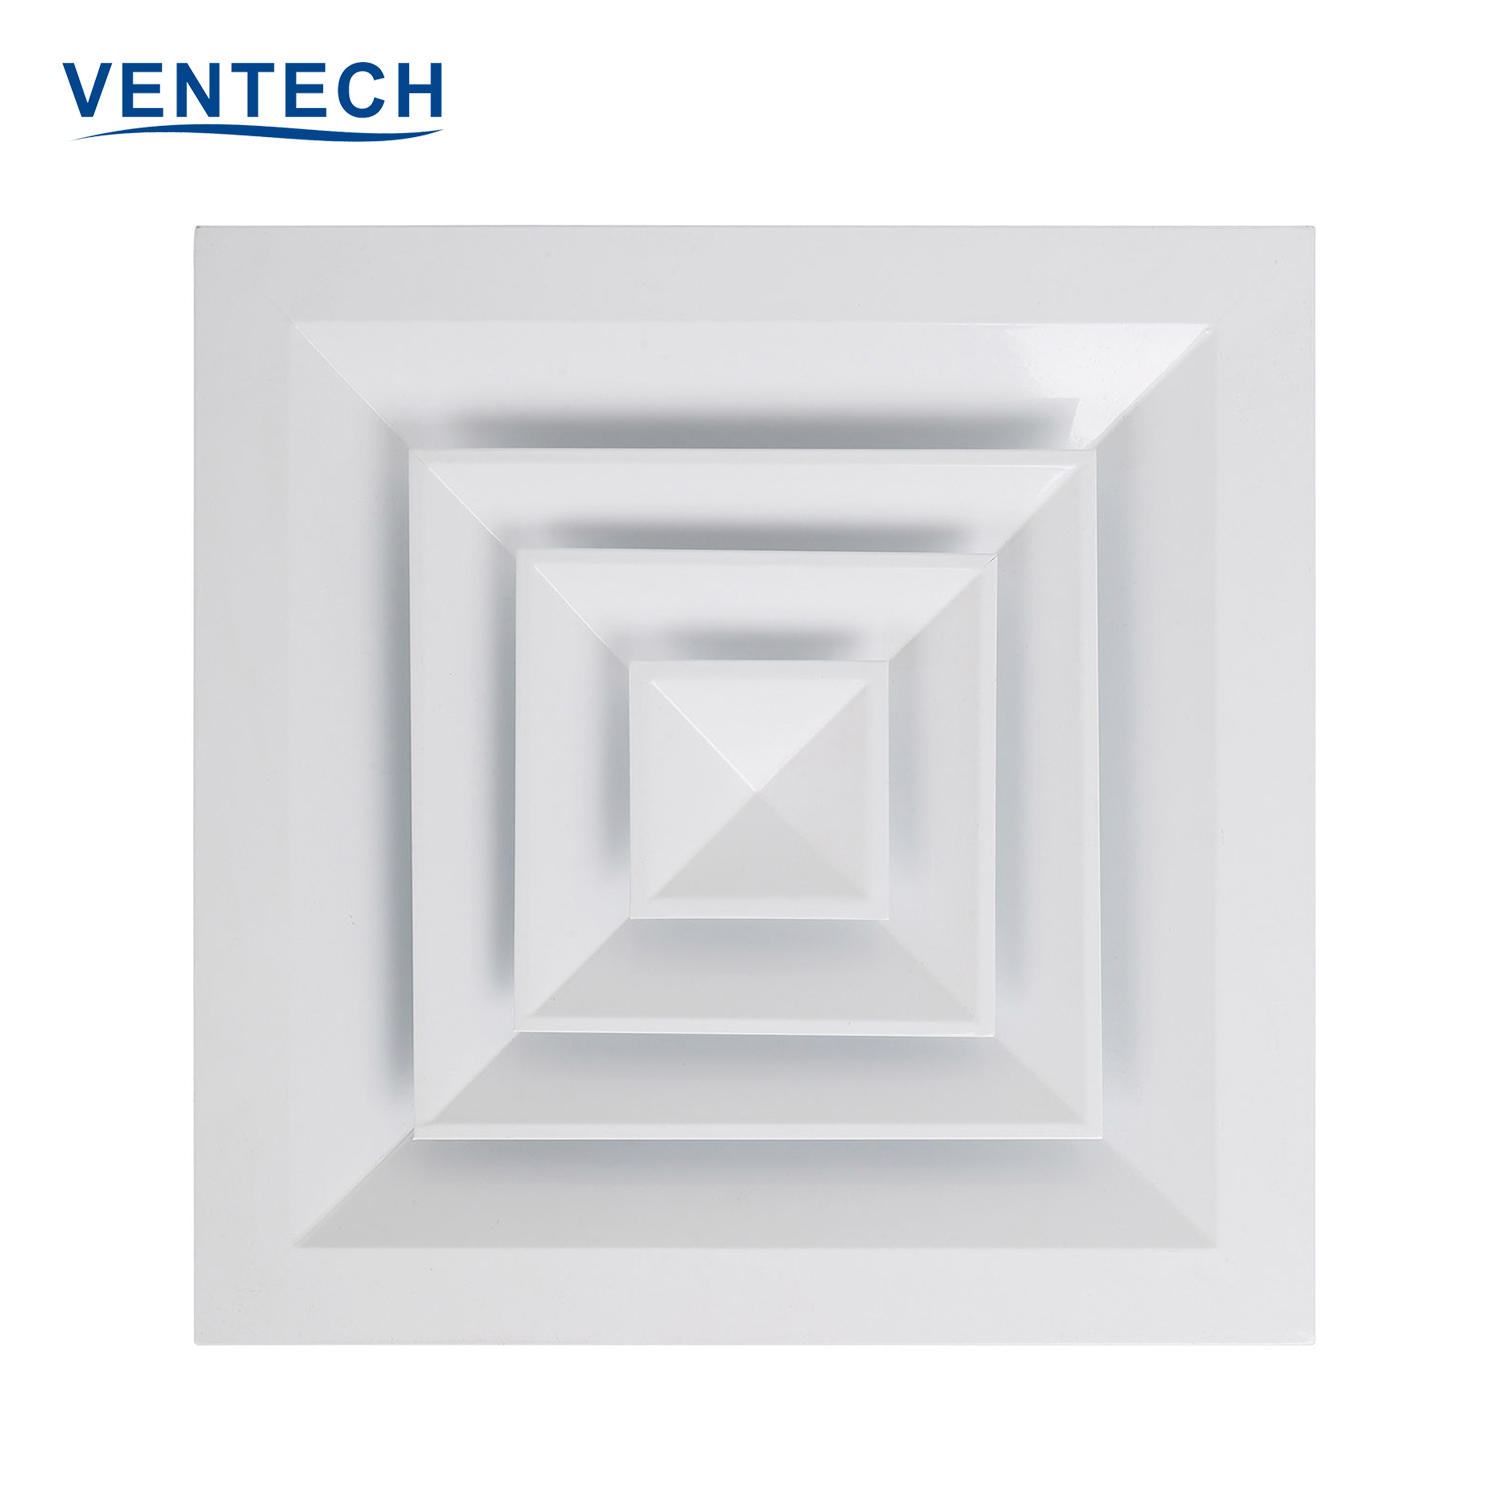 Hvac System VENTECH Exhaust Air Conditioning Aluminum Outlet Square Ceiling Air Duct Diffusers